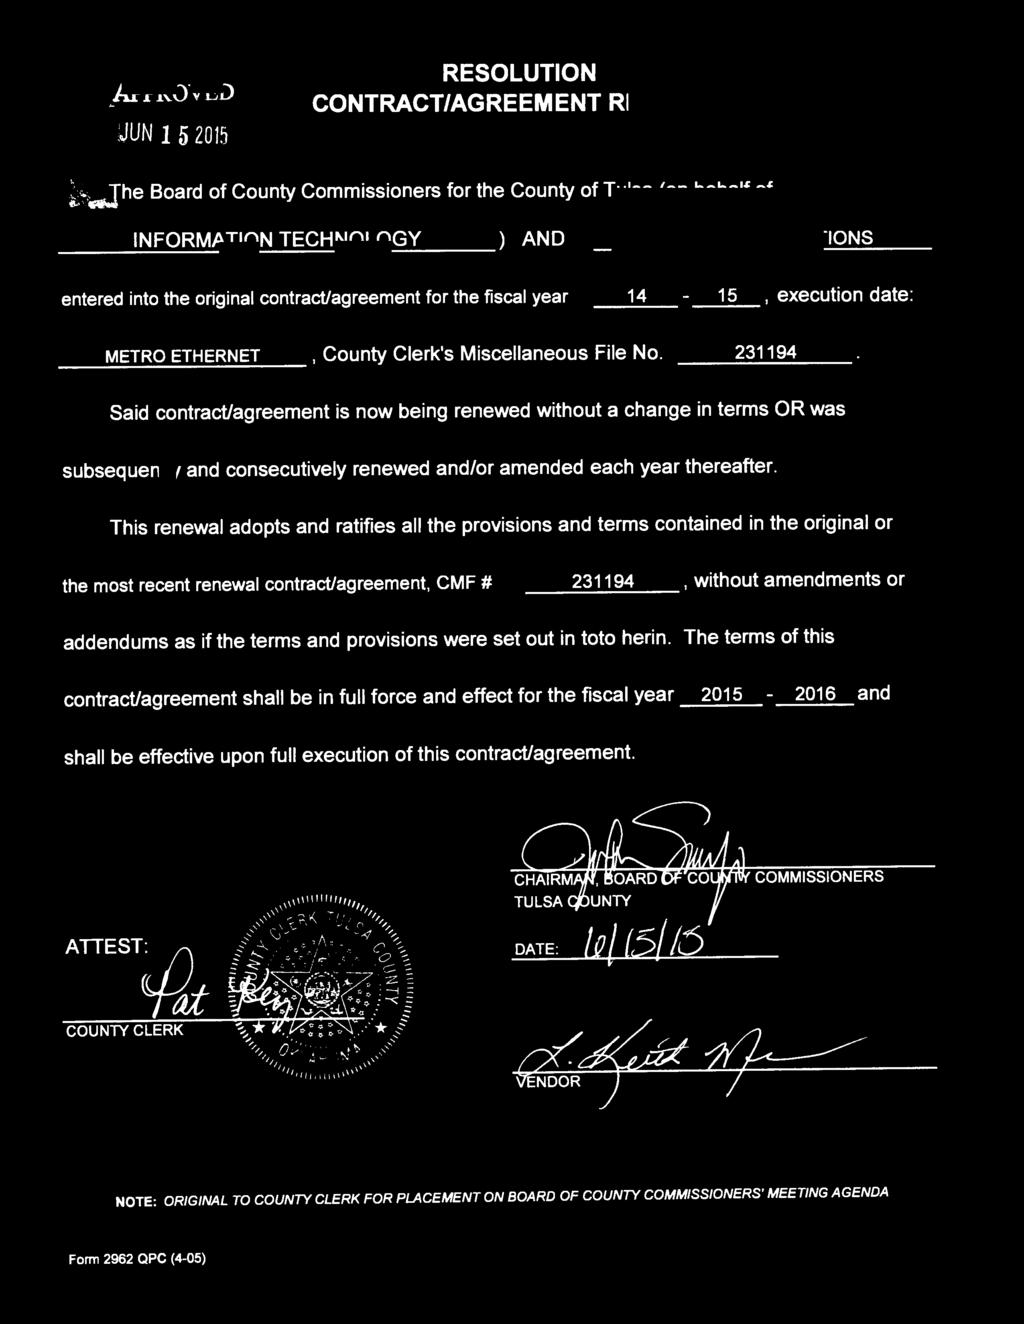 ~APPROVED UUN 152015 RESOLUTION STATE OF OKLAHOMA CONTRACT/AGREEMENT RENIE~i:1:,r1u~ TY 20 5 JUN I 0 AM IQ: I 3, he Board of County Commissioners for the County of Tulsa (on behalf of.